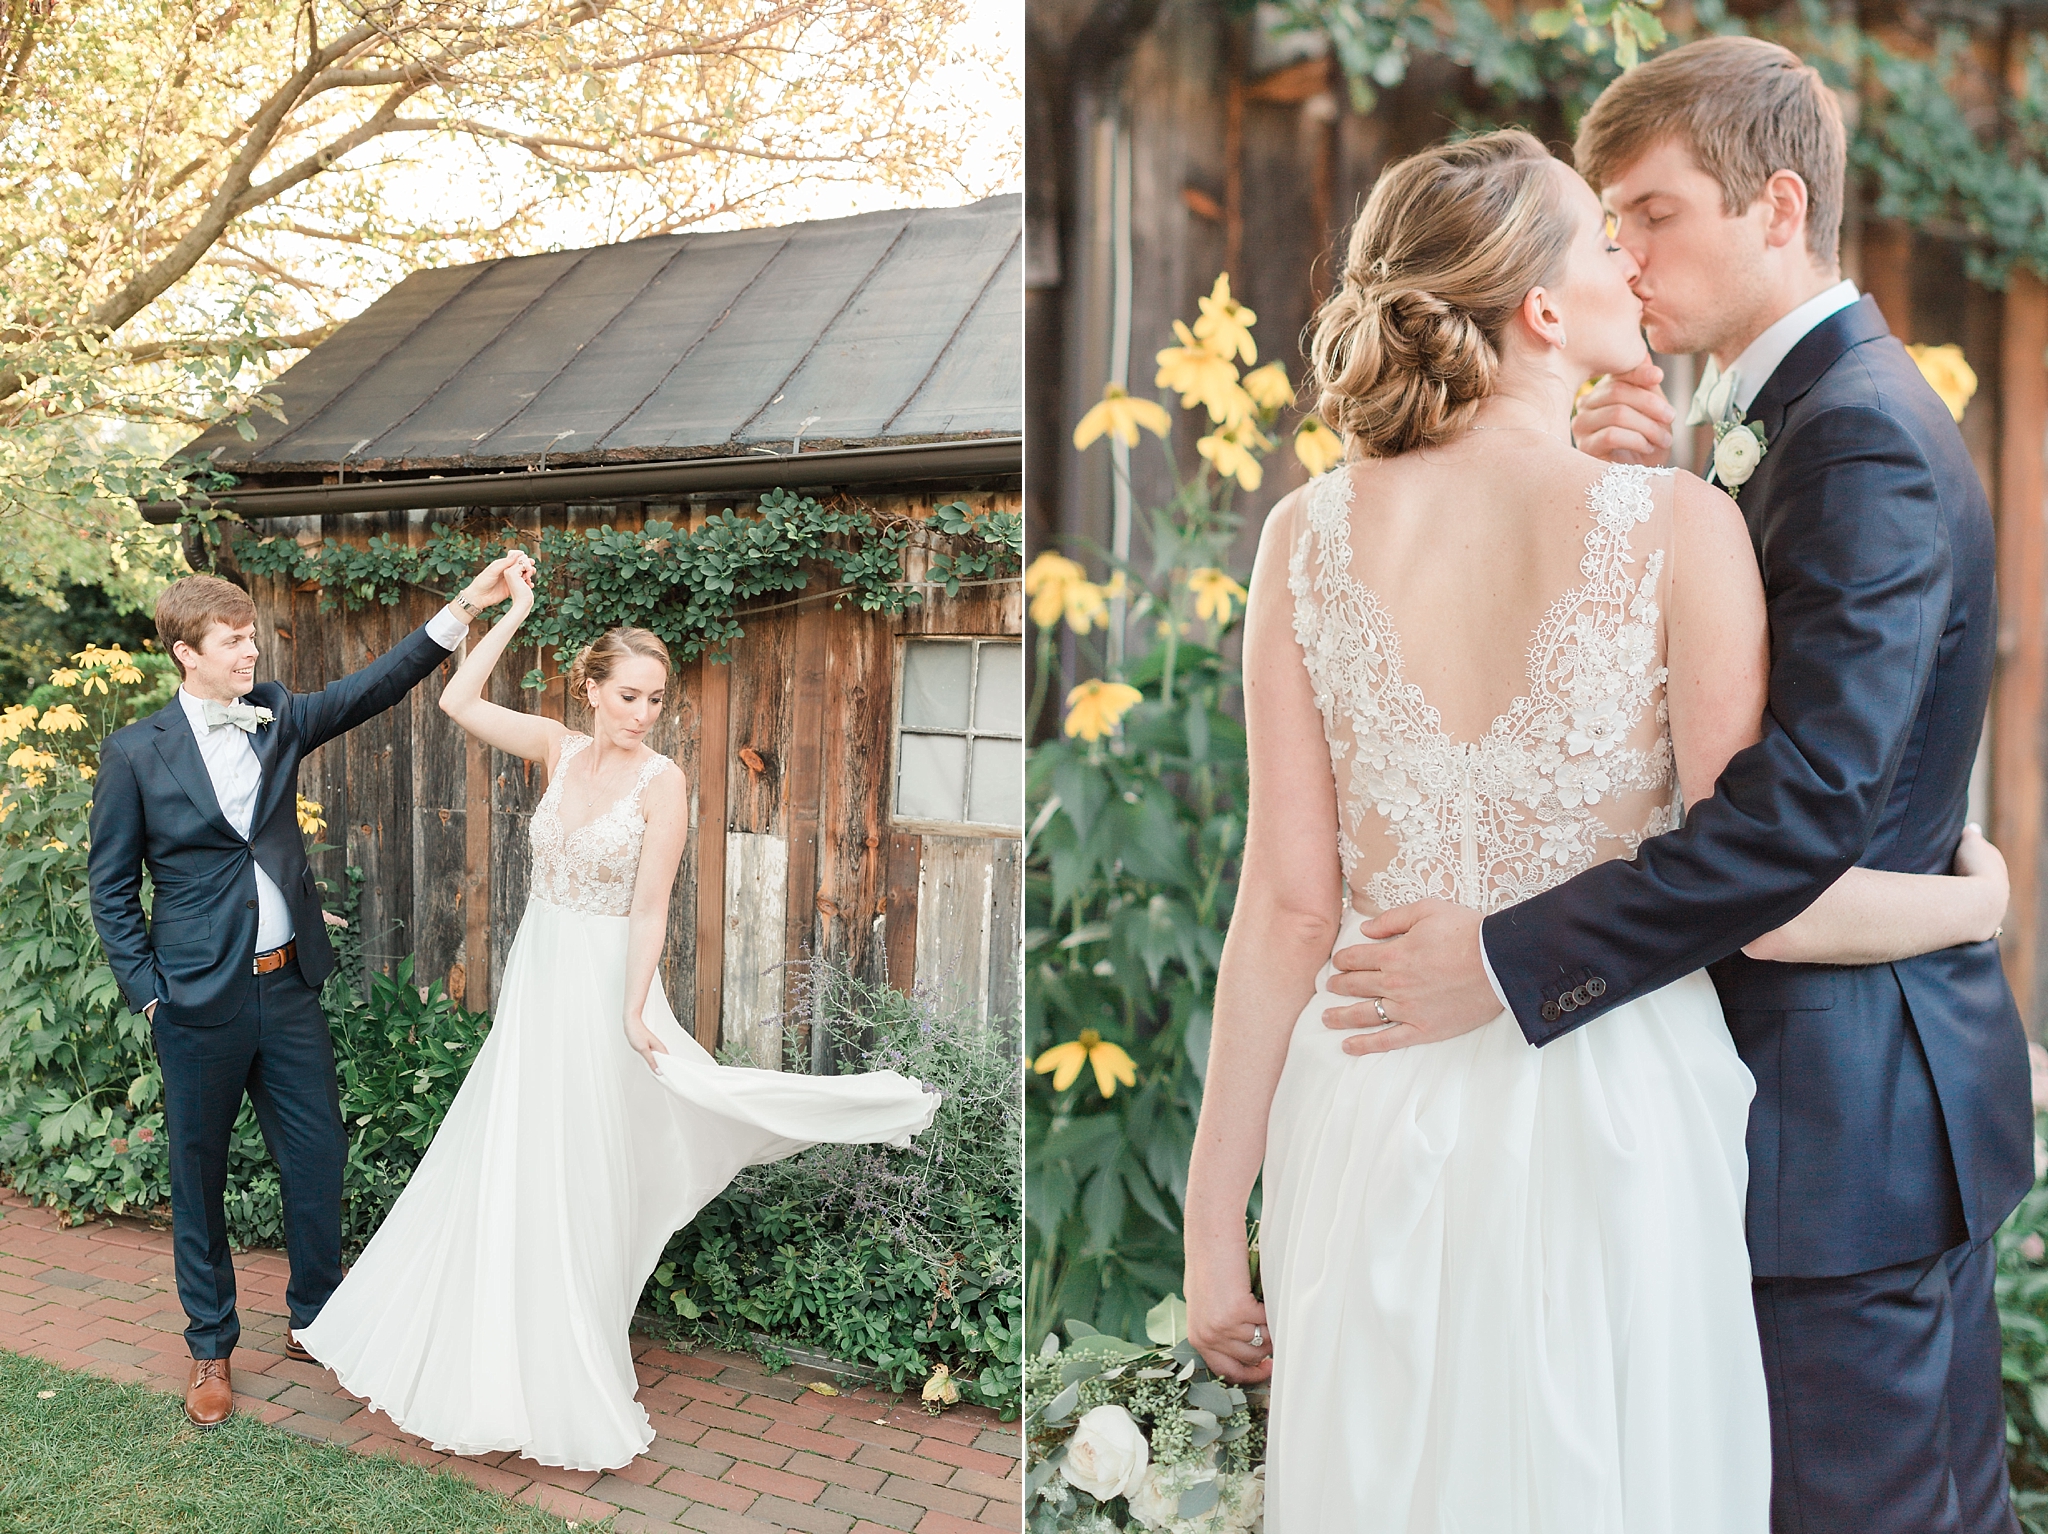 This Thomas Birkby House wedding photographed by DC photographer, Alicia Lacey, was an elegant affair complete with lush floral designs by Holly Chapple.  